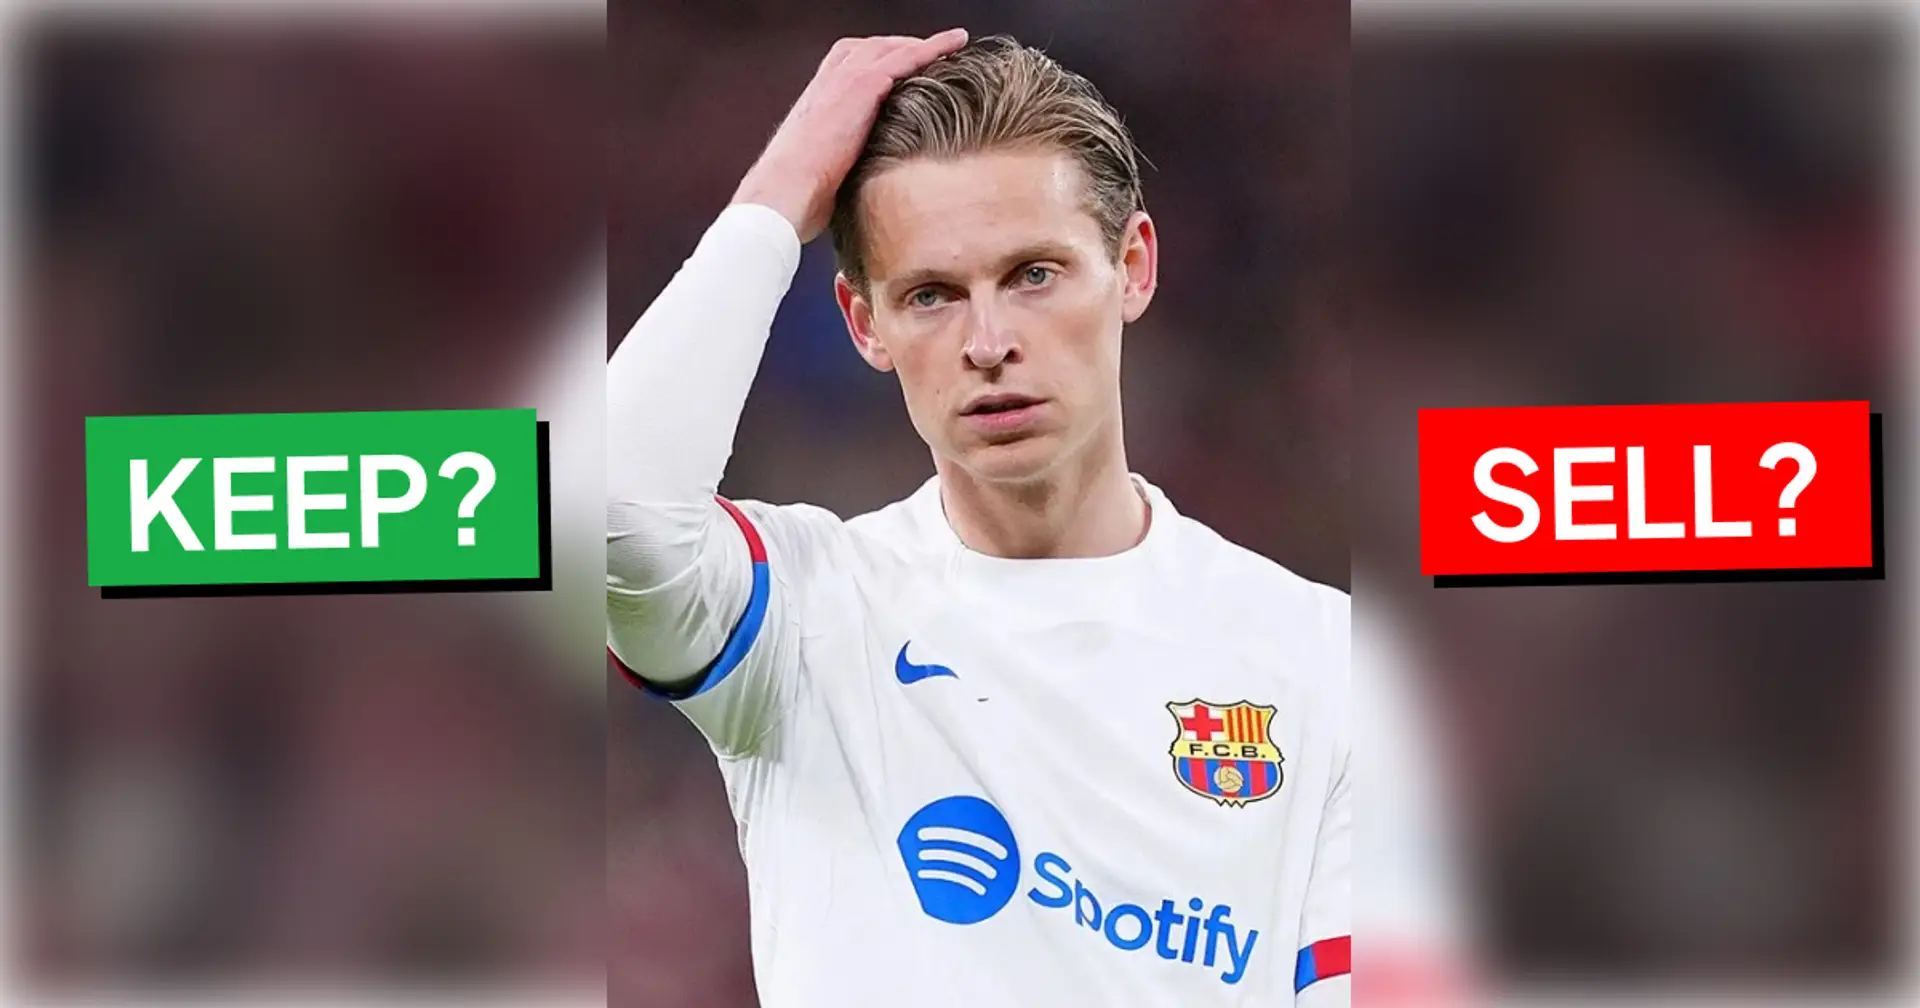 De Jong — keep or sell? Barcelona fans split on Frenkie future — have your say in the comments, too